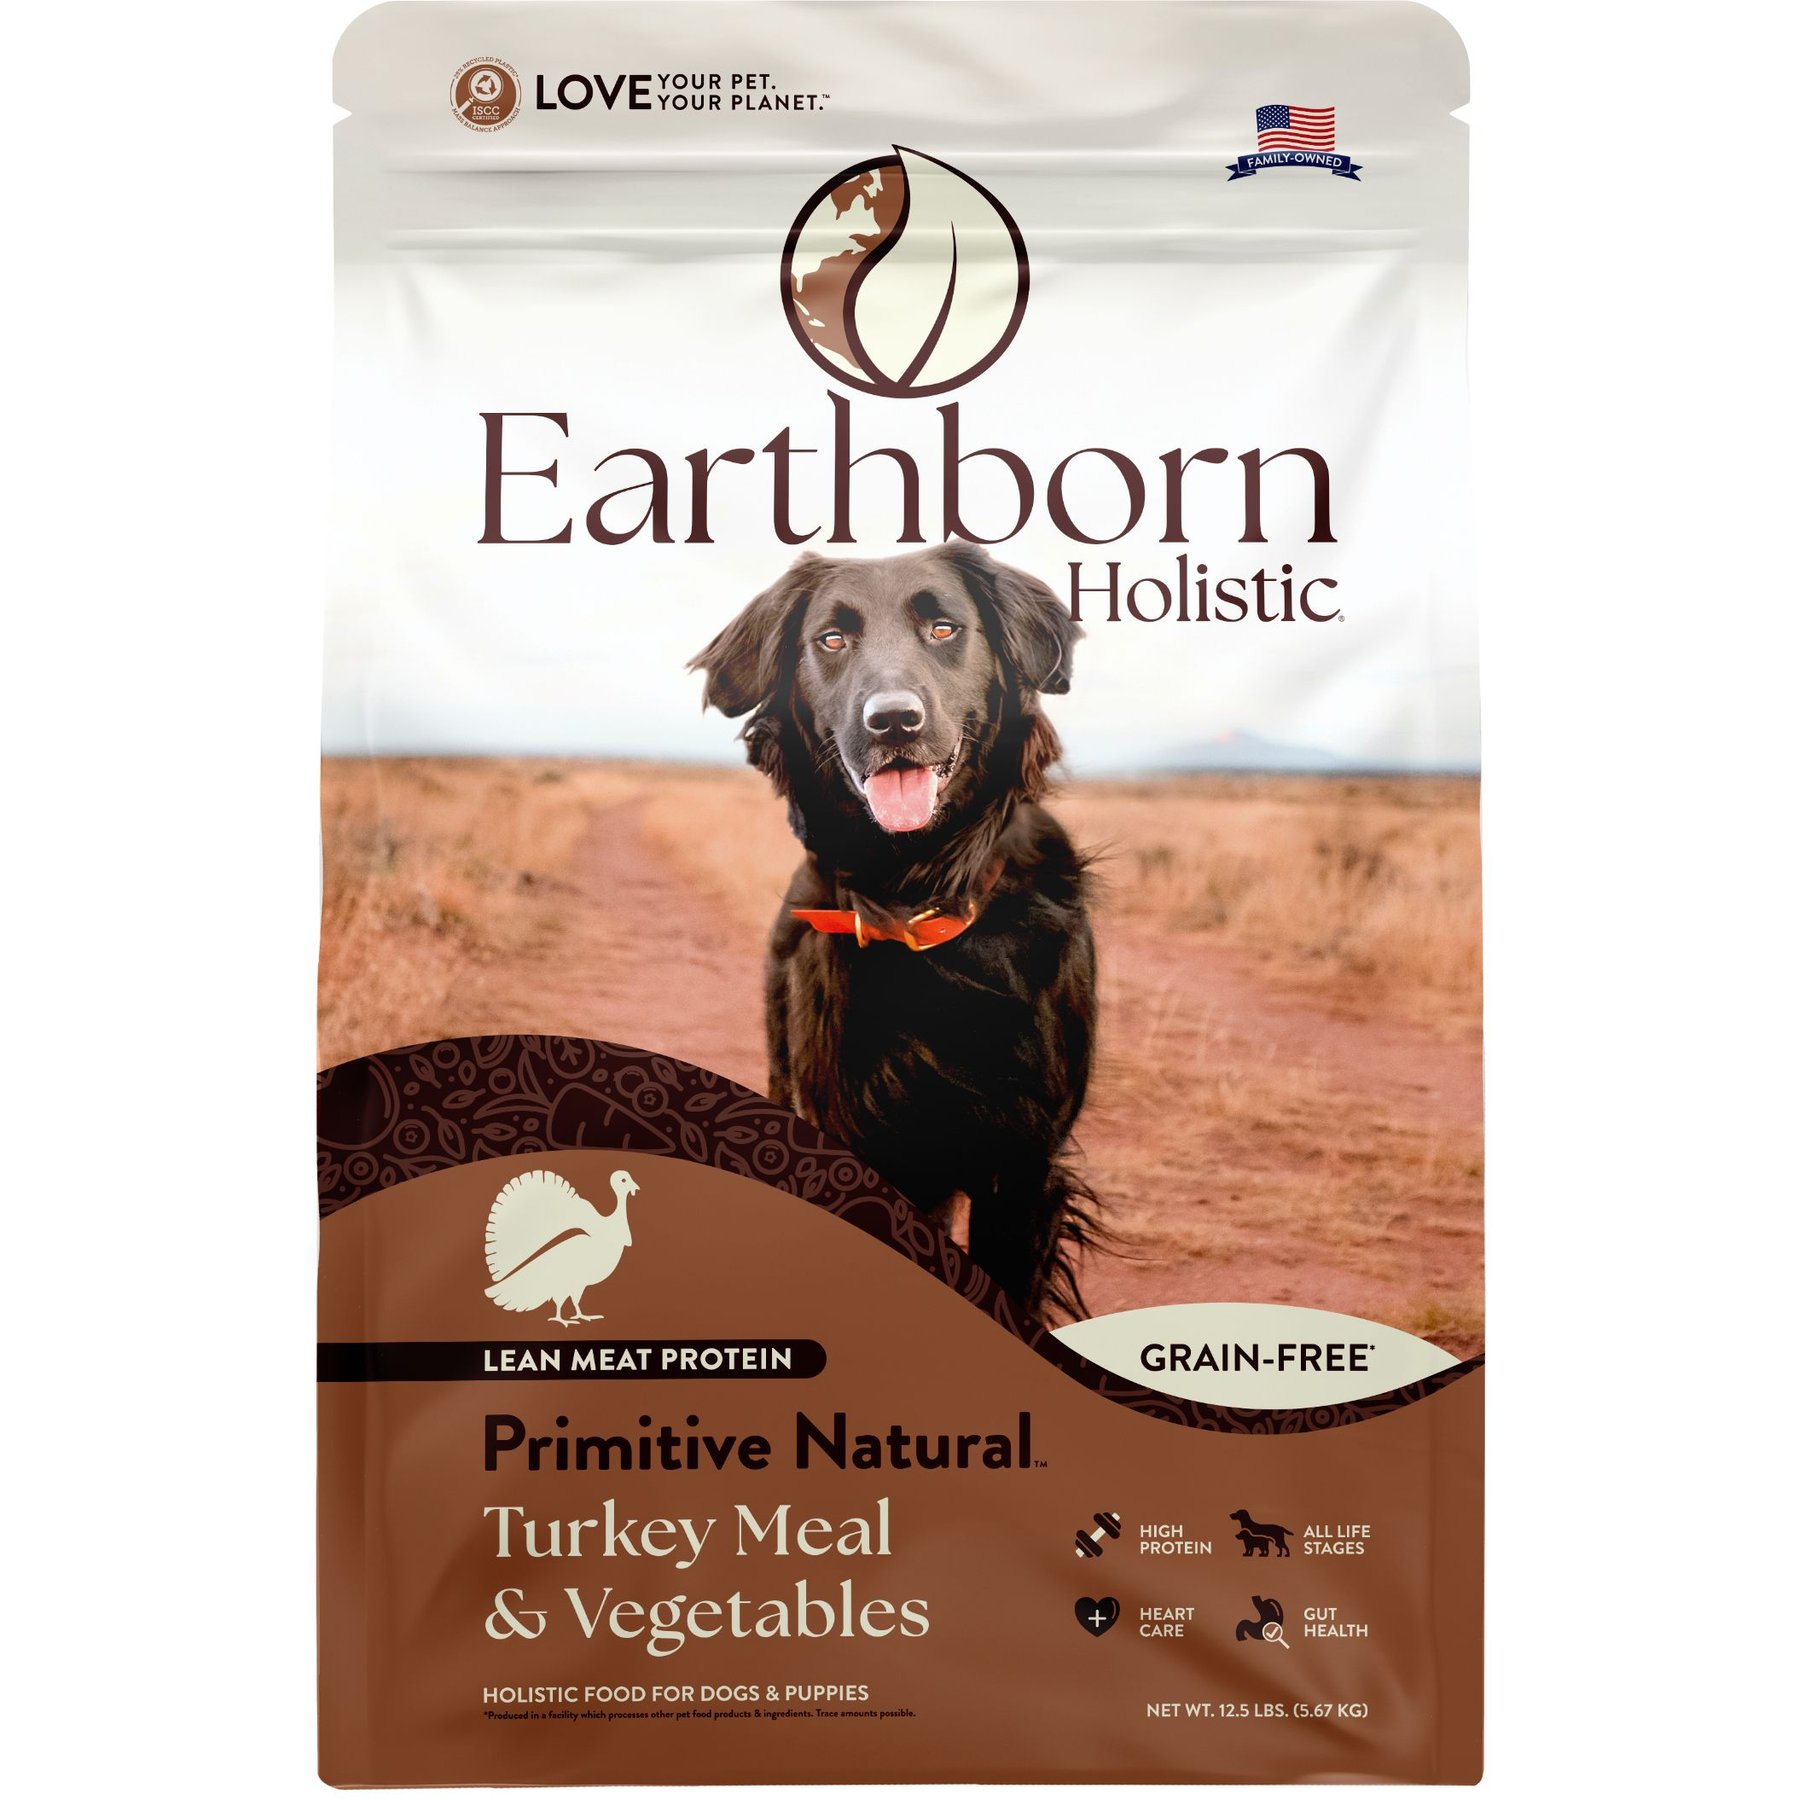 The Ultimate Guide to Interactive Dog Toys - Earthborn Holistic Pet Food